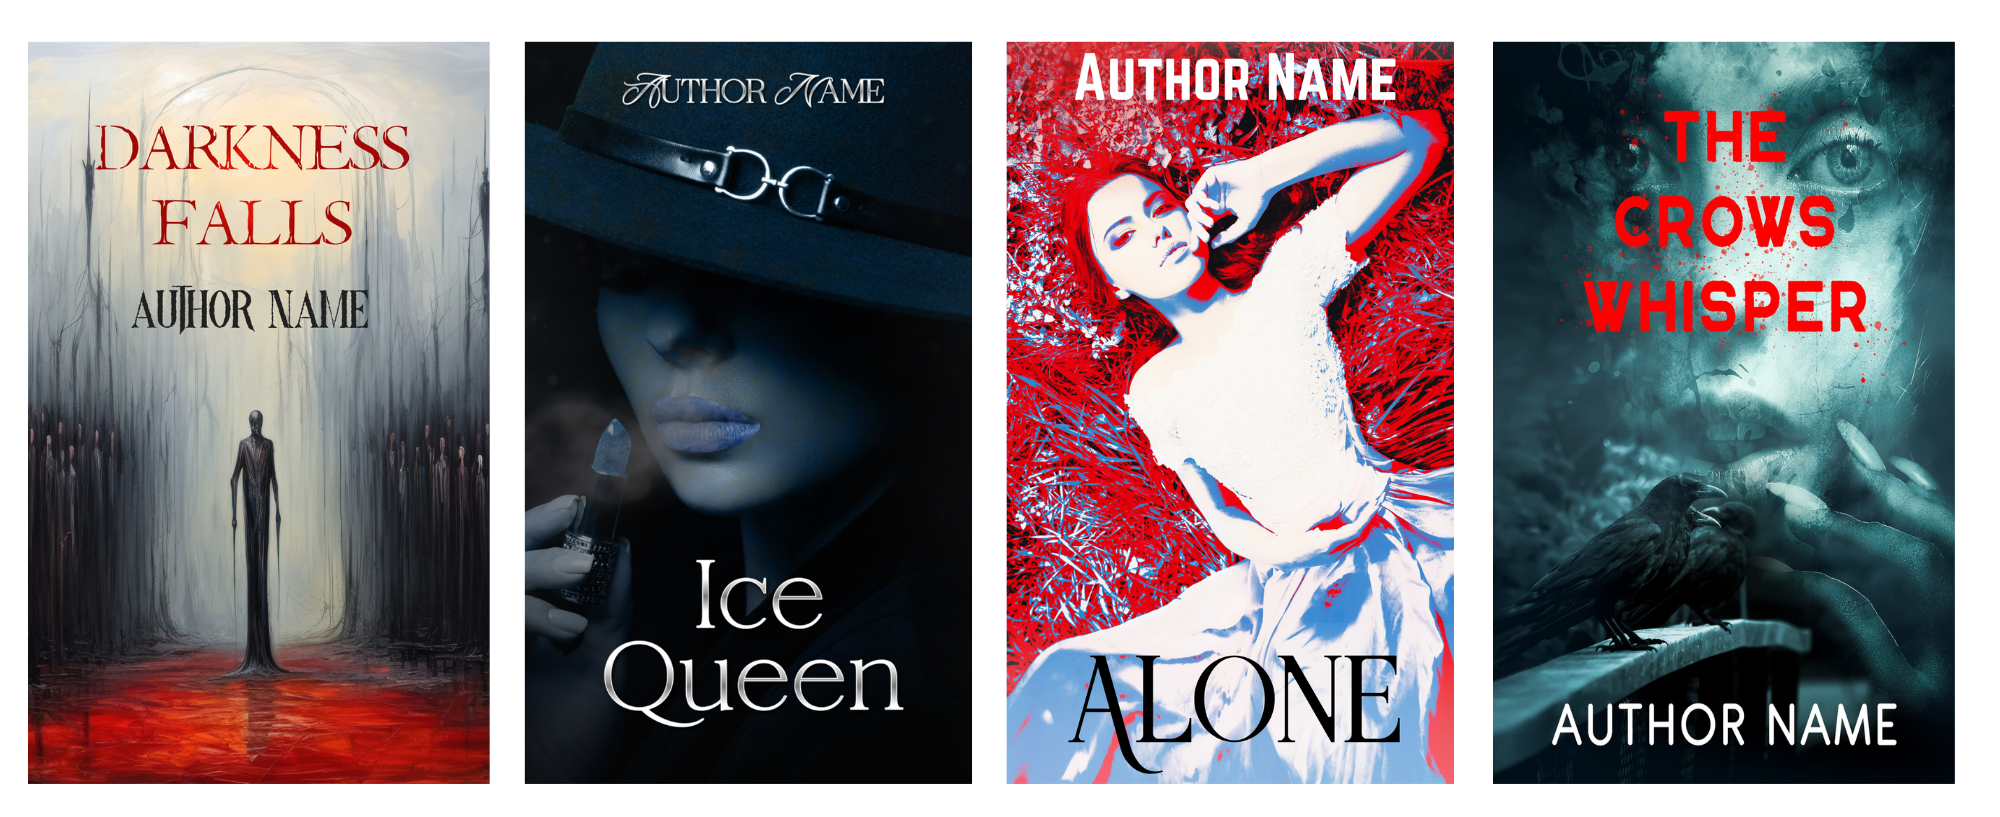 Four book covers in a horizontal row. The first shows a figure in a red cloak entering a dark space with the title "Darkness Falls." The second features a close-up of a woman in a hat titled "Ice Queen." The third depicts a woman in white and red grass with the title "Alone." The fourth shows a crow and a hand with the title "The Crow's Whisper." All show "Author Name. BookSelf Book Cover Design & Premade Book Covers